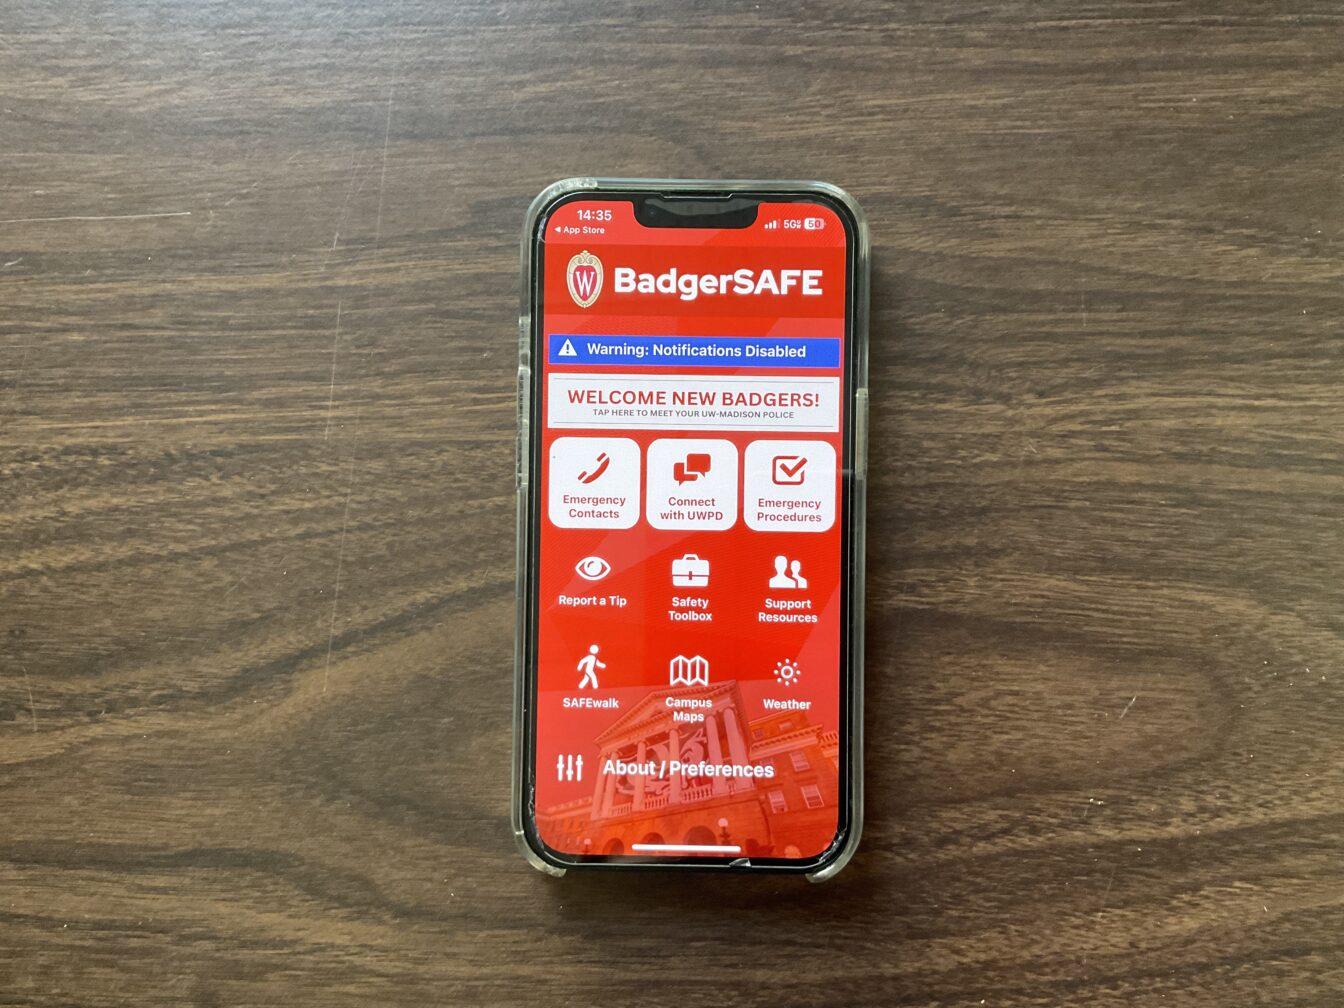 UWPD releases BadgerSAFE app to centralize student resources, services